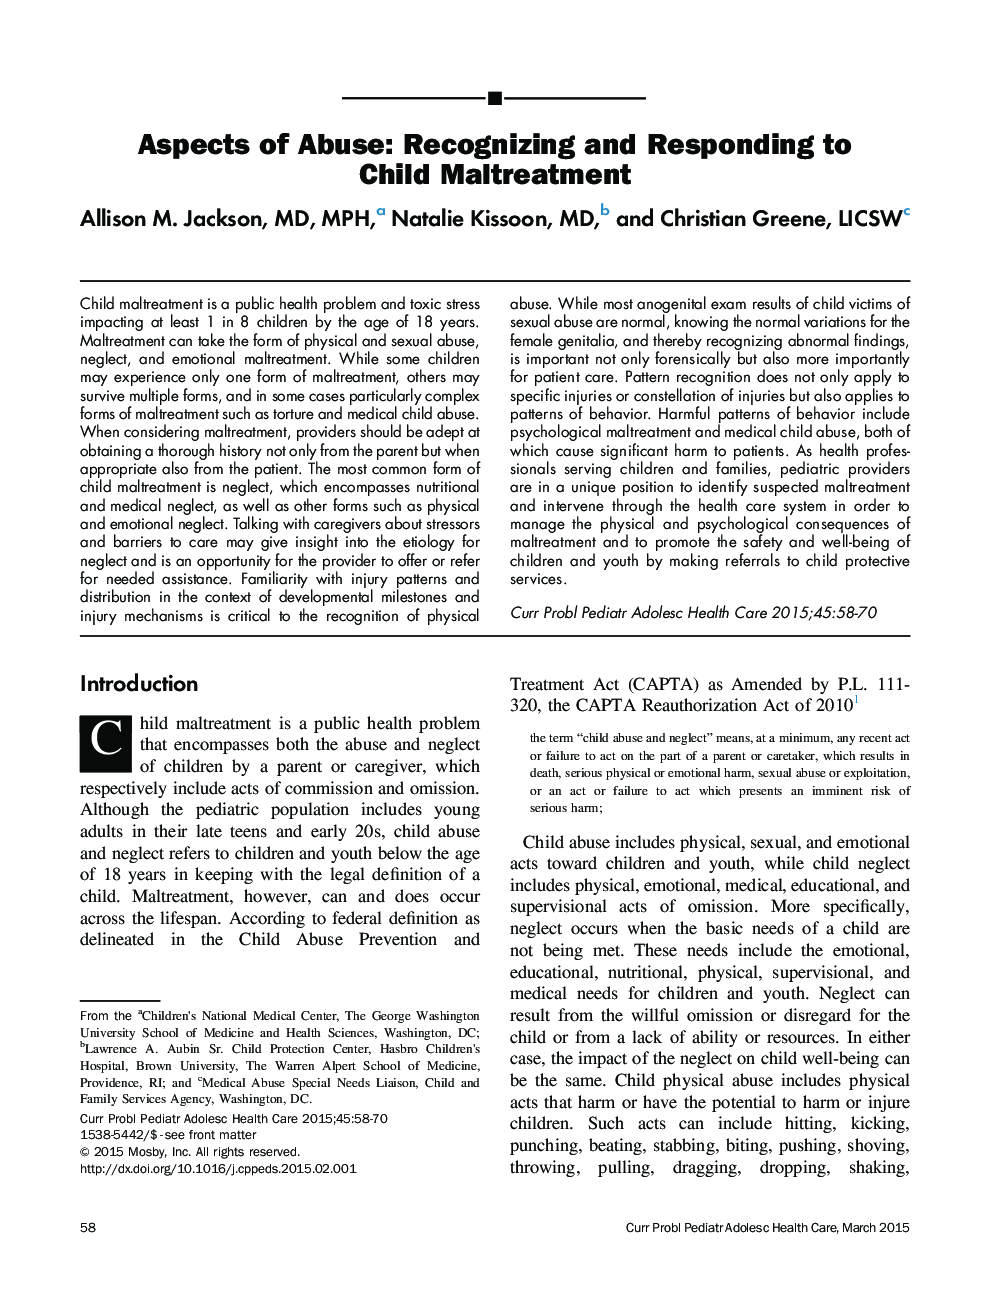 Aspects of Abuse: Recognizing and Responding to Child Maltreatment